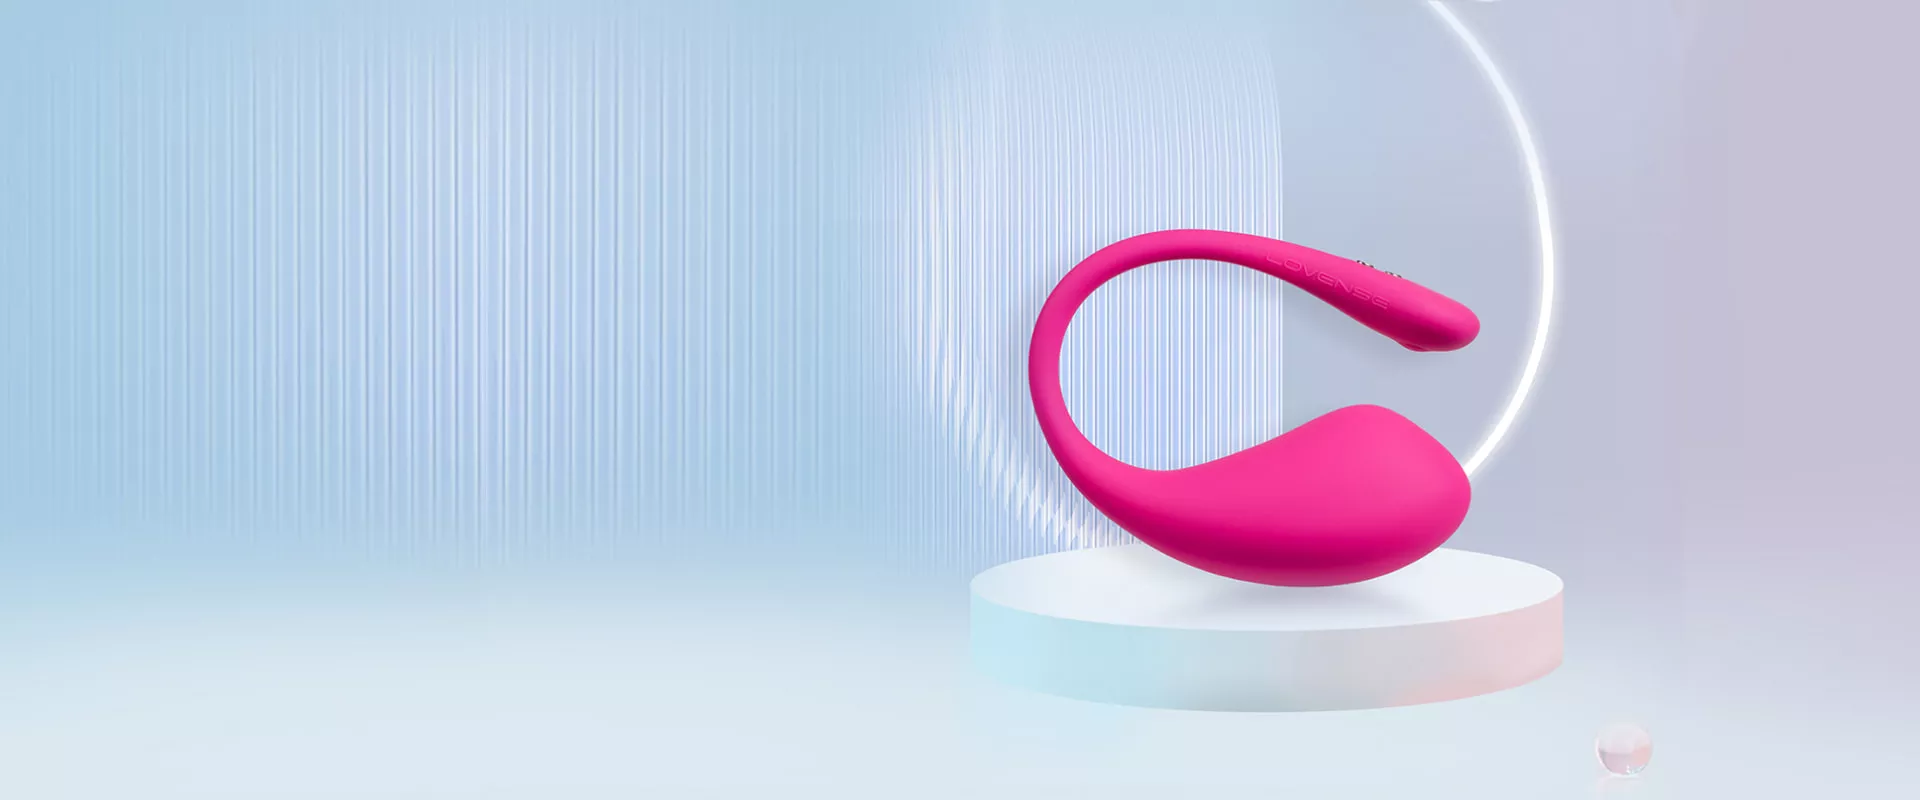 Lush 3 by Lovense. The most powerful Bluetooth remote control vibrator!